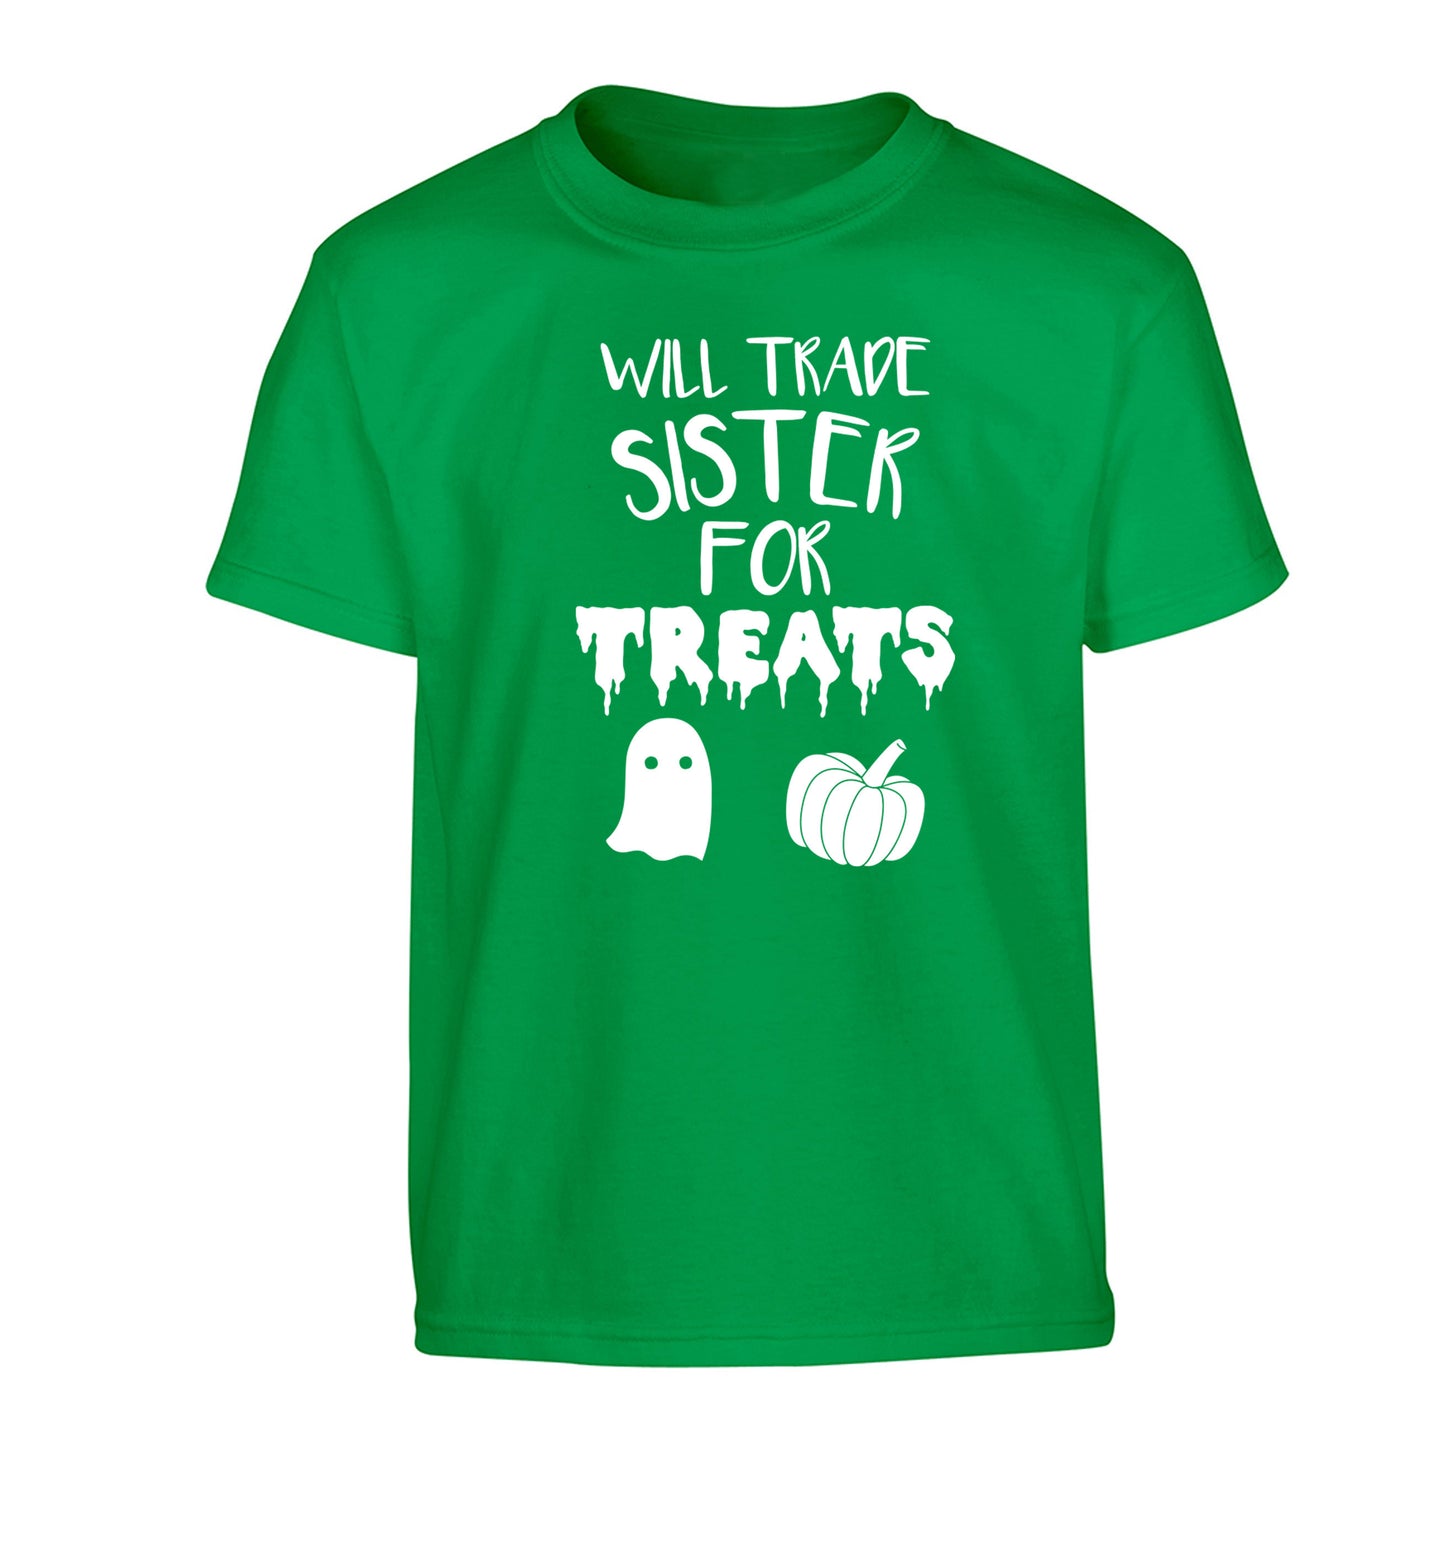 Will trade sister for treats Children's green Tshirt 12-14 Years